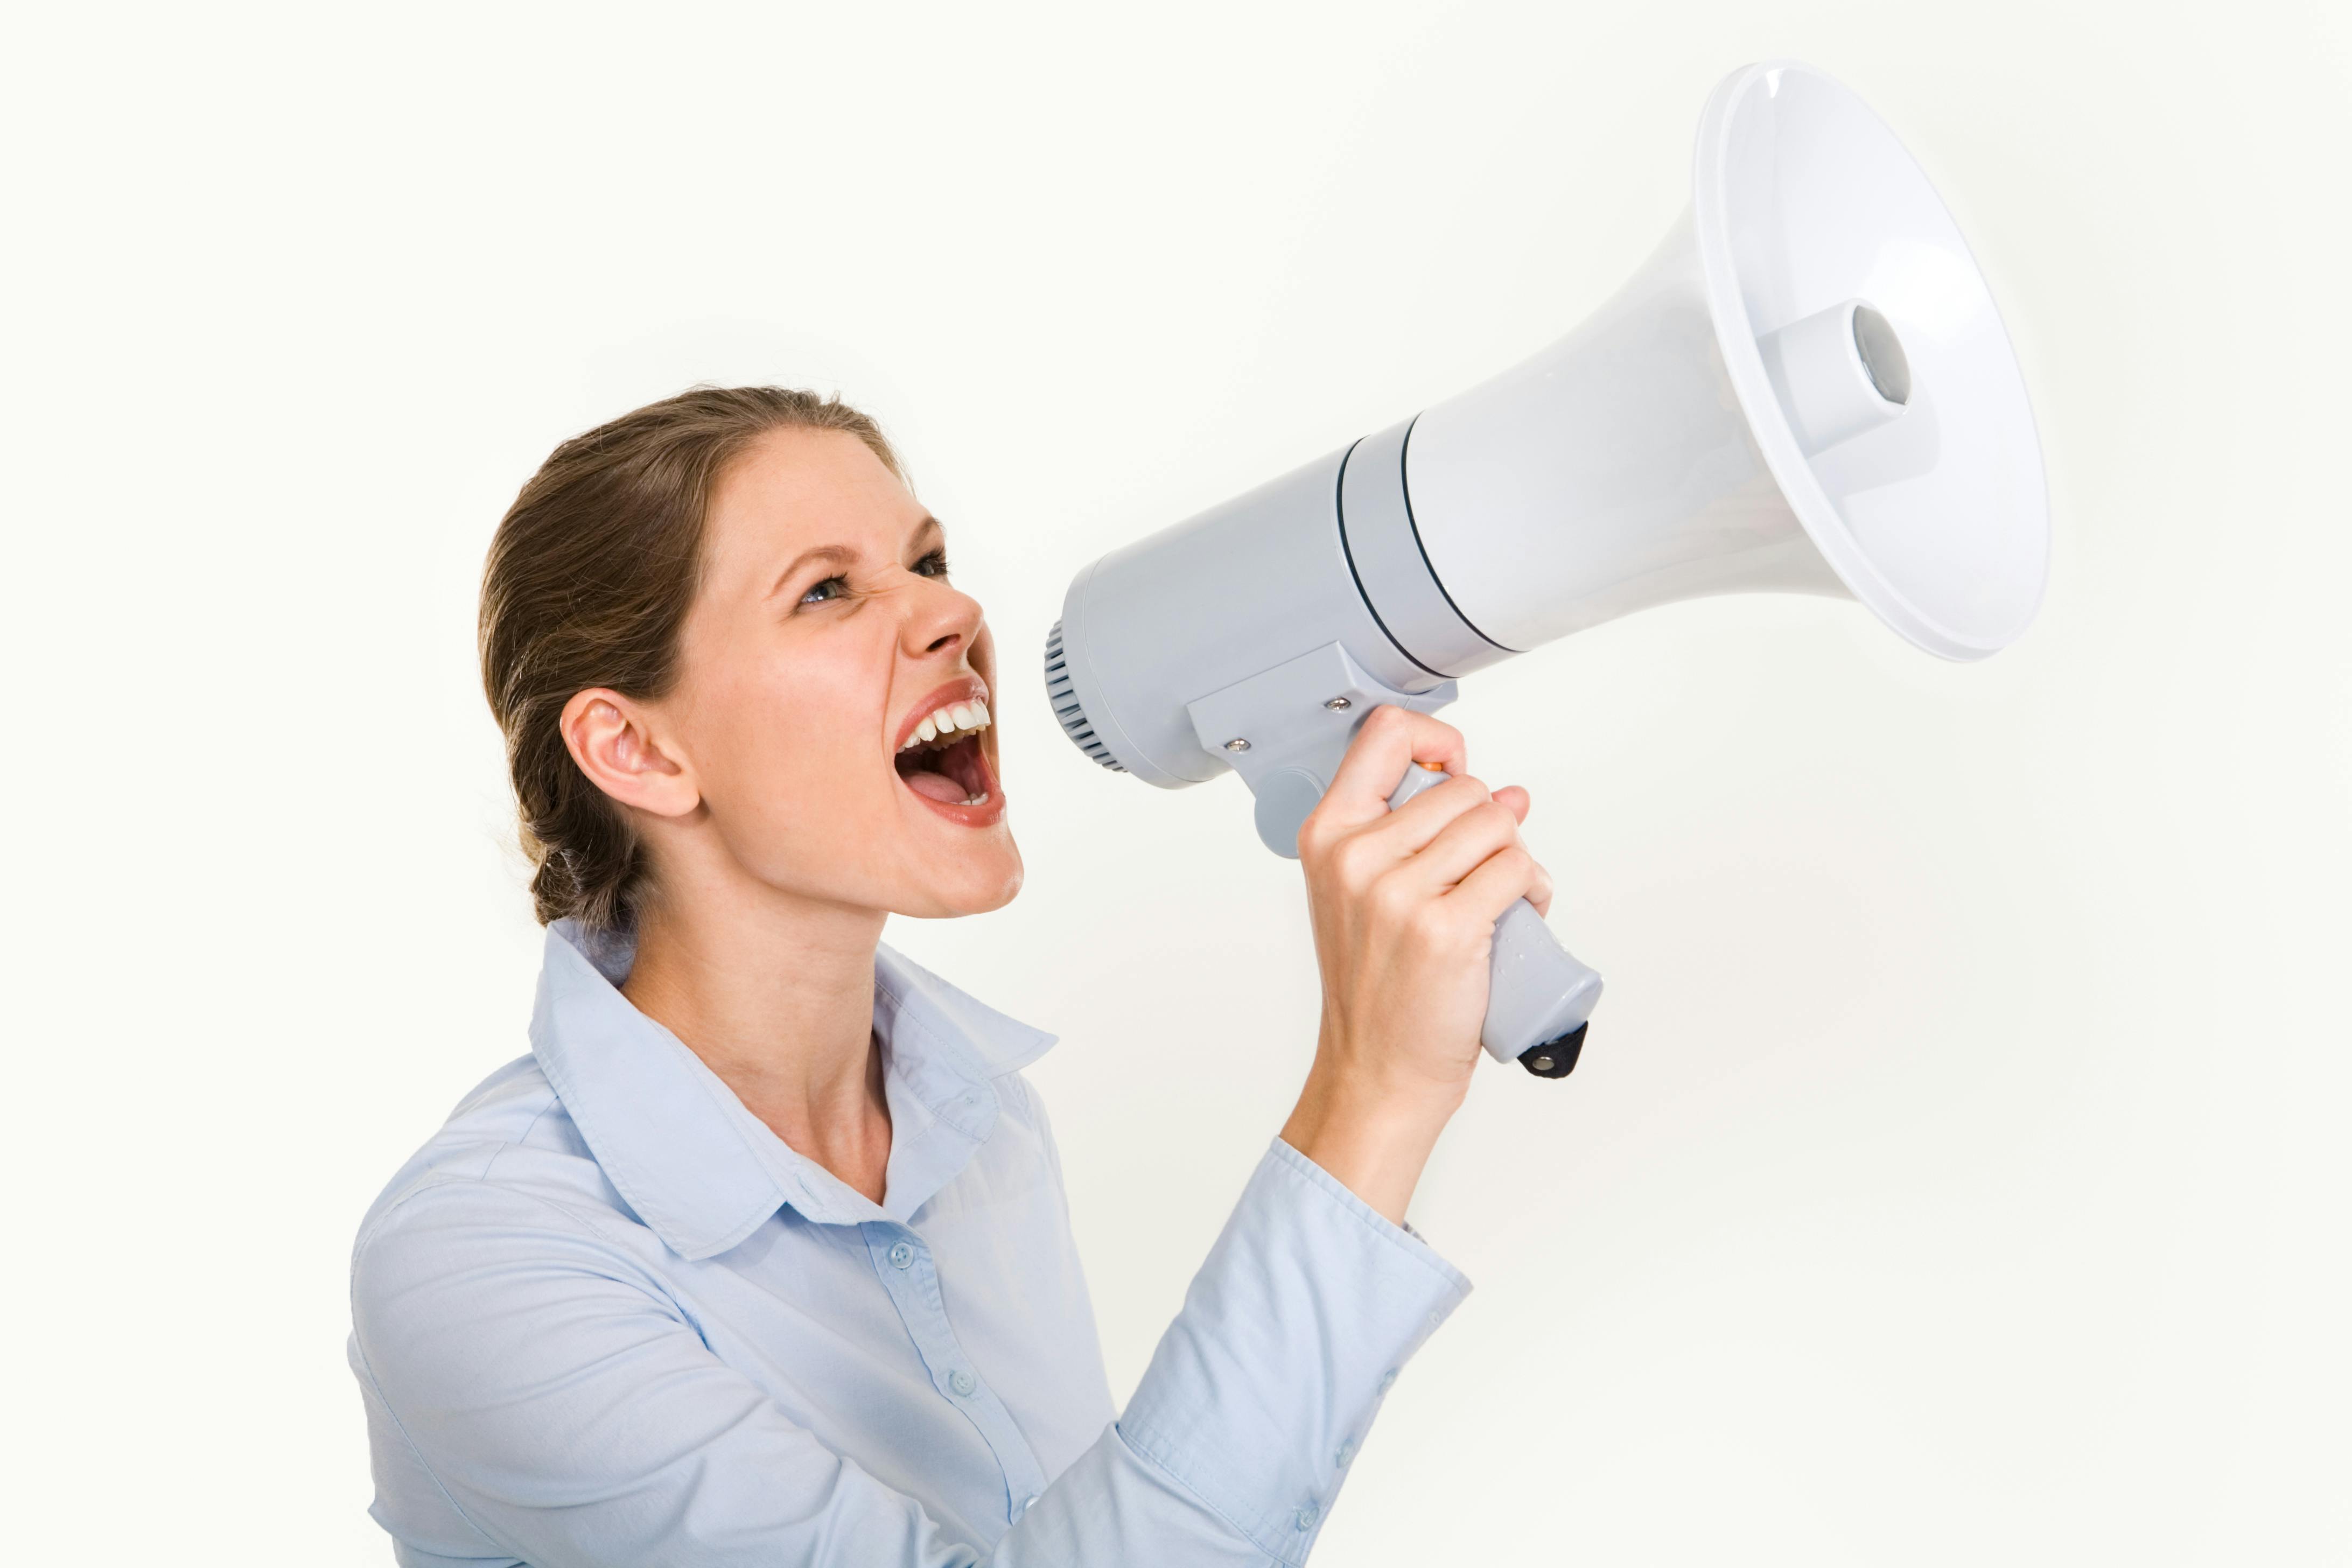 Free Young Woman With a Megaphone Stock Photo